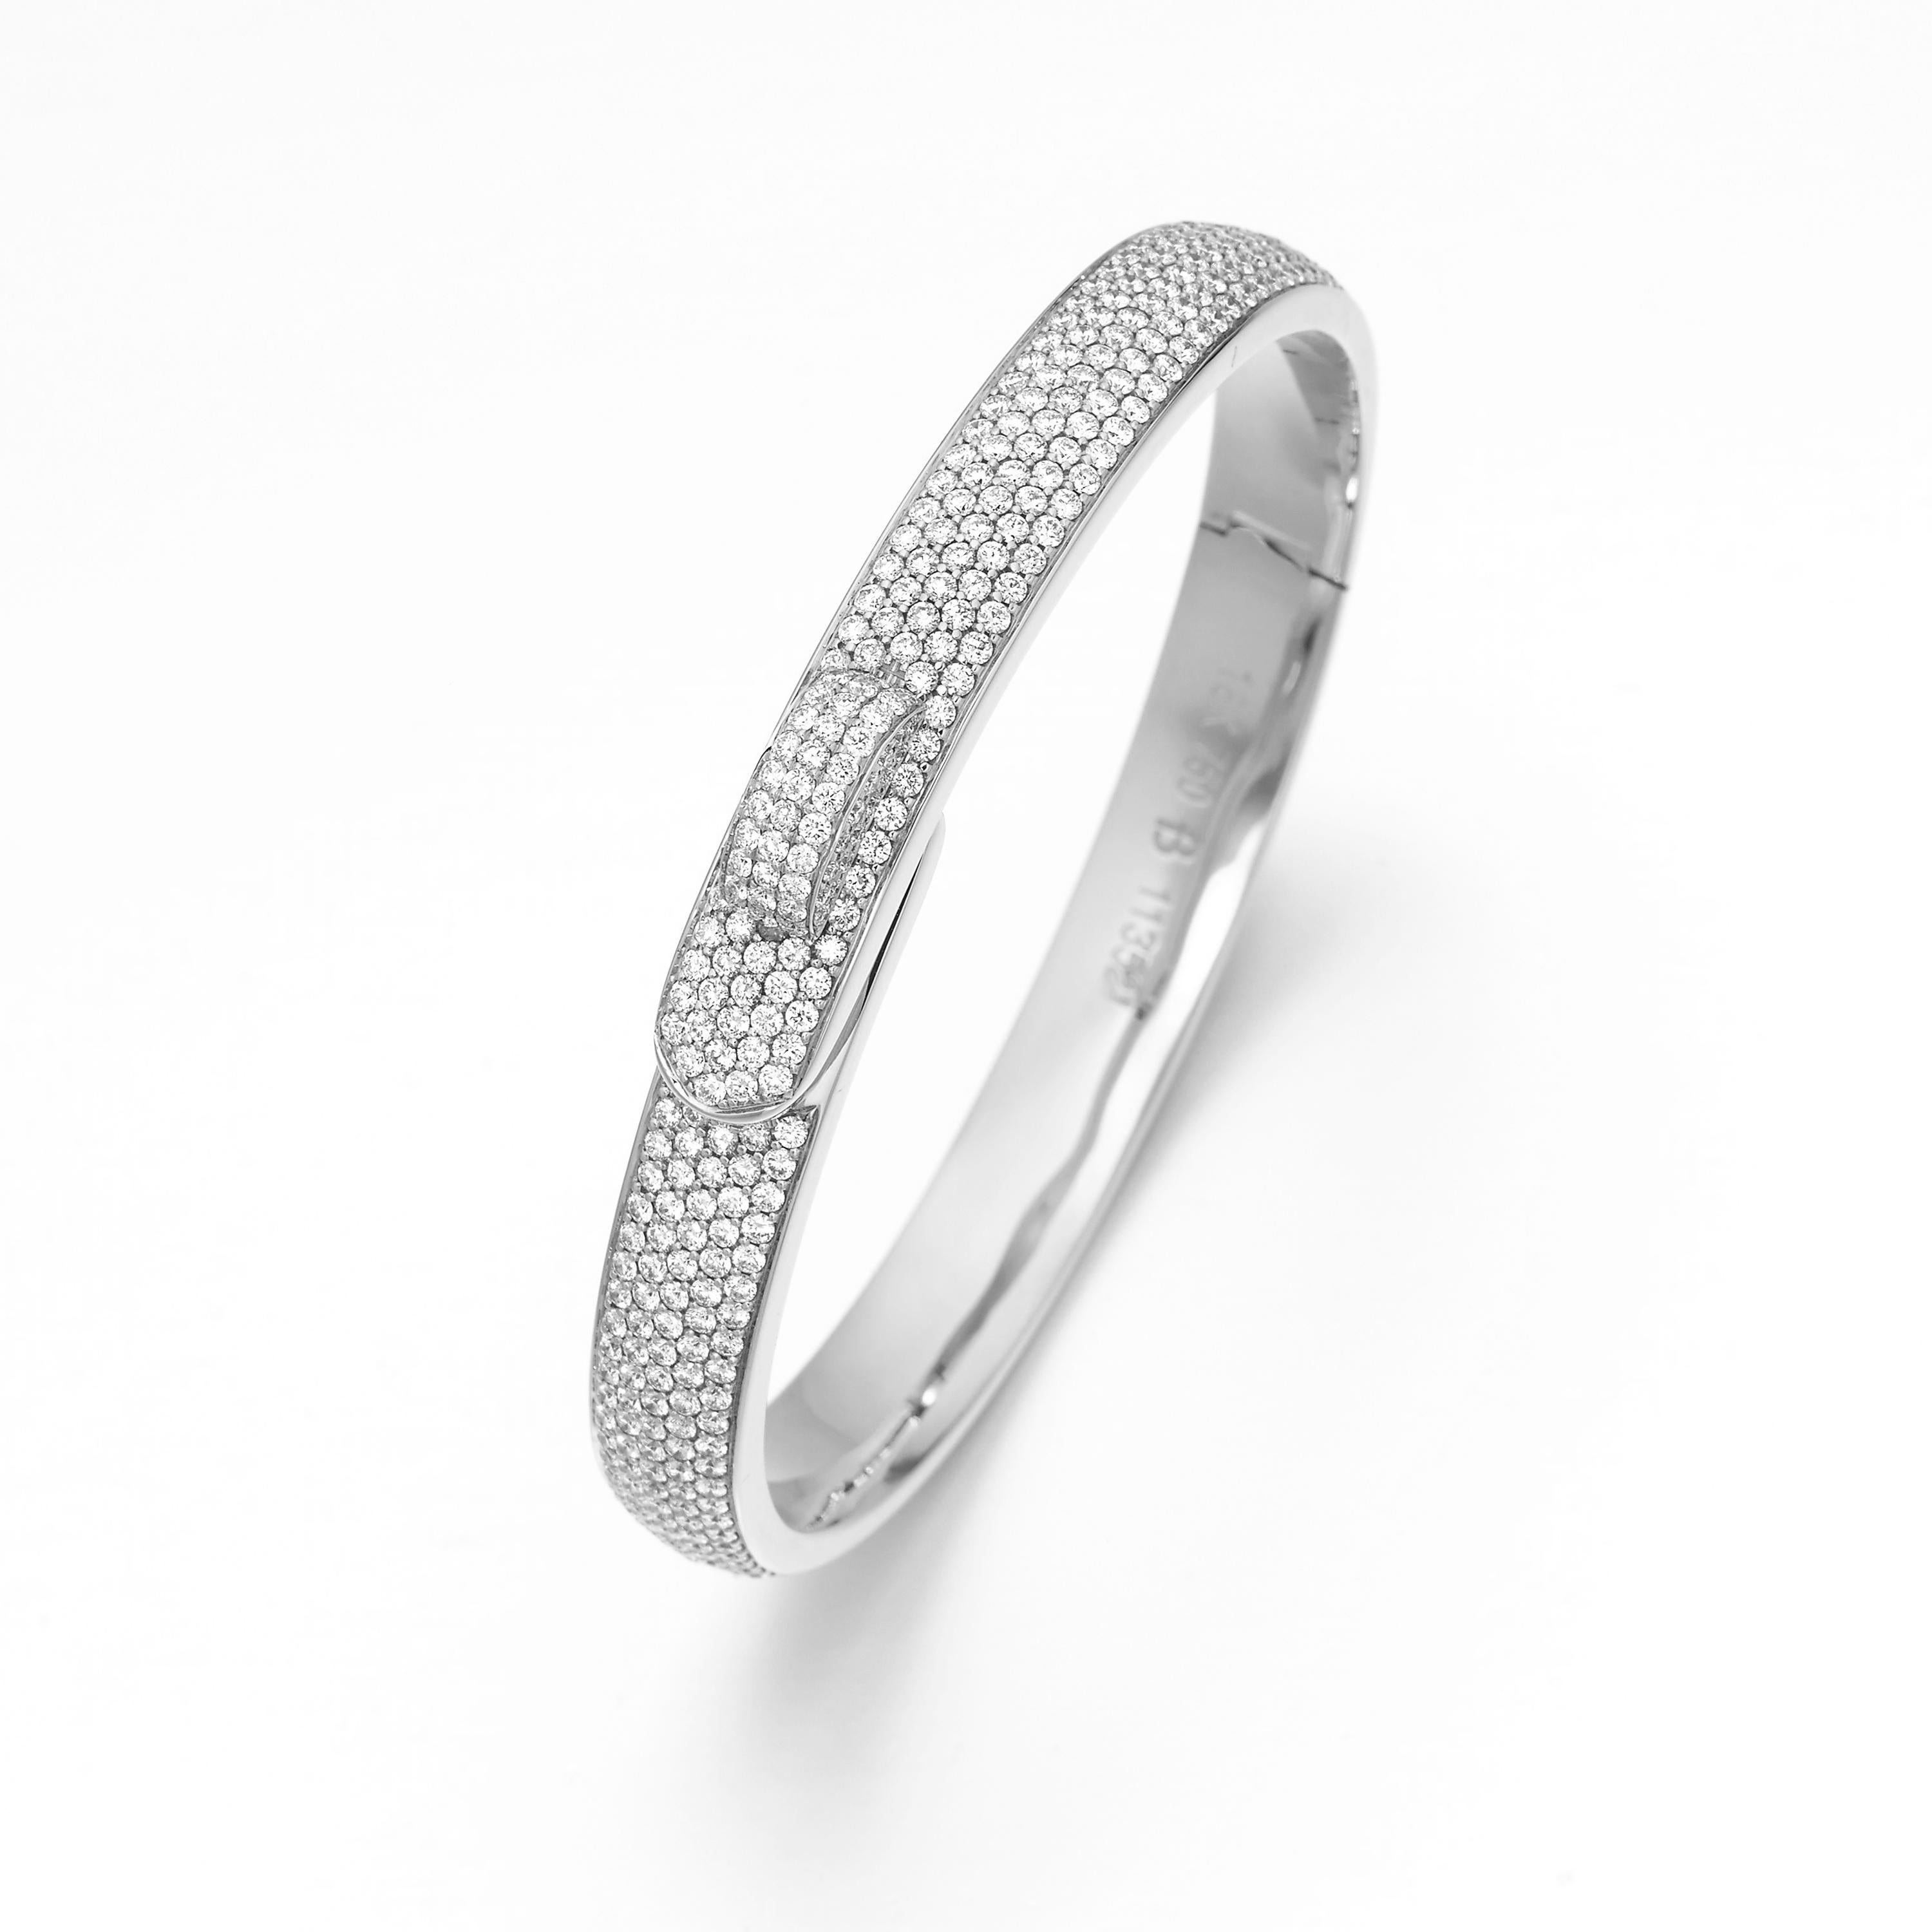 Butani's bangle features a subtle belt fastening design.  Embellished with 4.54 carats of pavé round diamonds, the bracelet is handcrafted in 18 karat white gold.  Perfect for stacking.  Wear yours as an everyday signature.  

Composition: 
18K